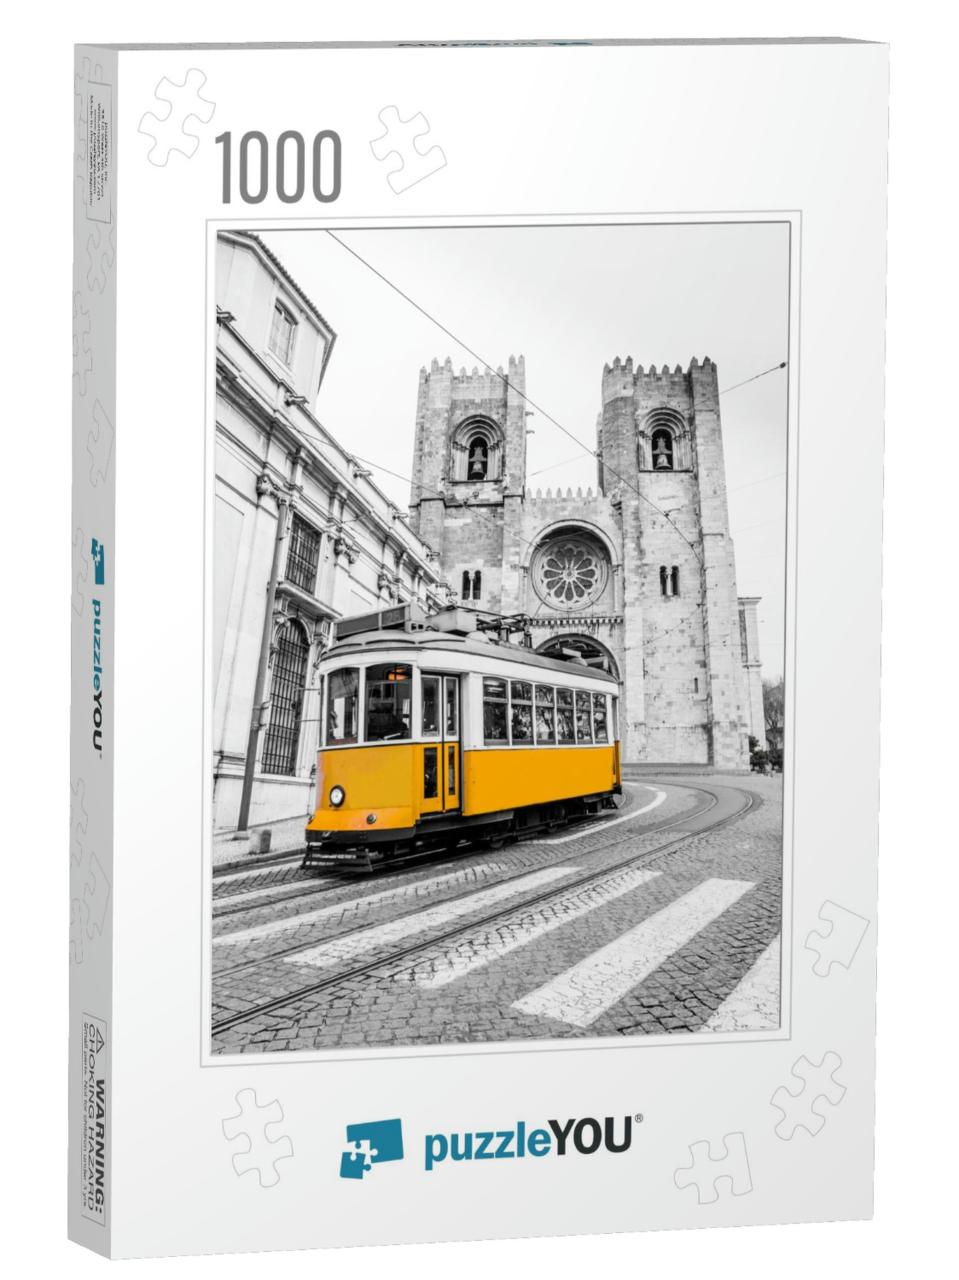 Tram Line 28e of the Tram Lisbon Portugal... Jigsaw Puzzle with 1000 pieces